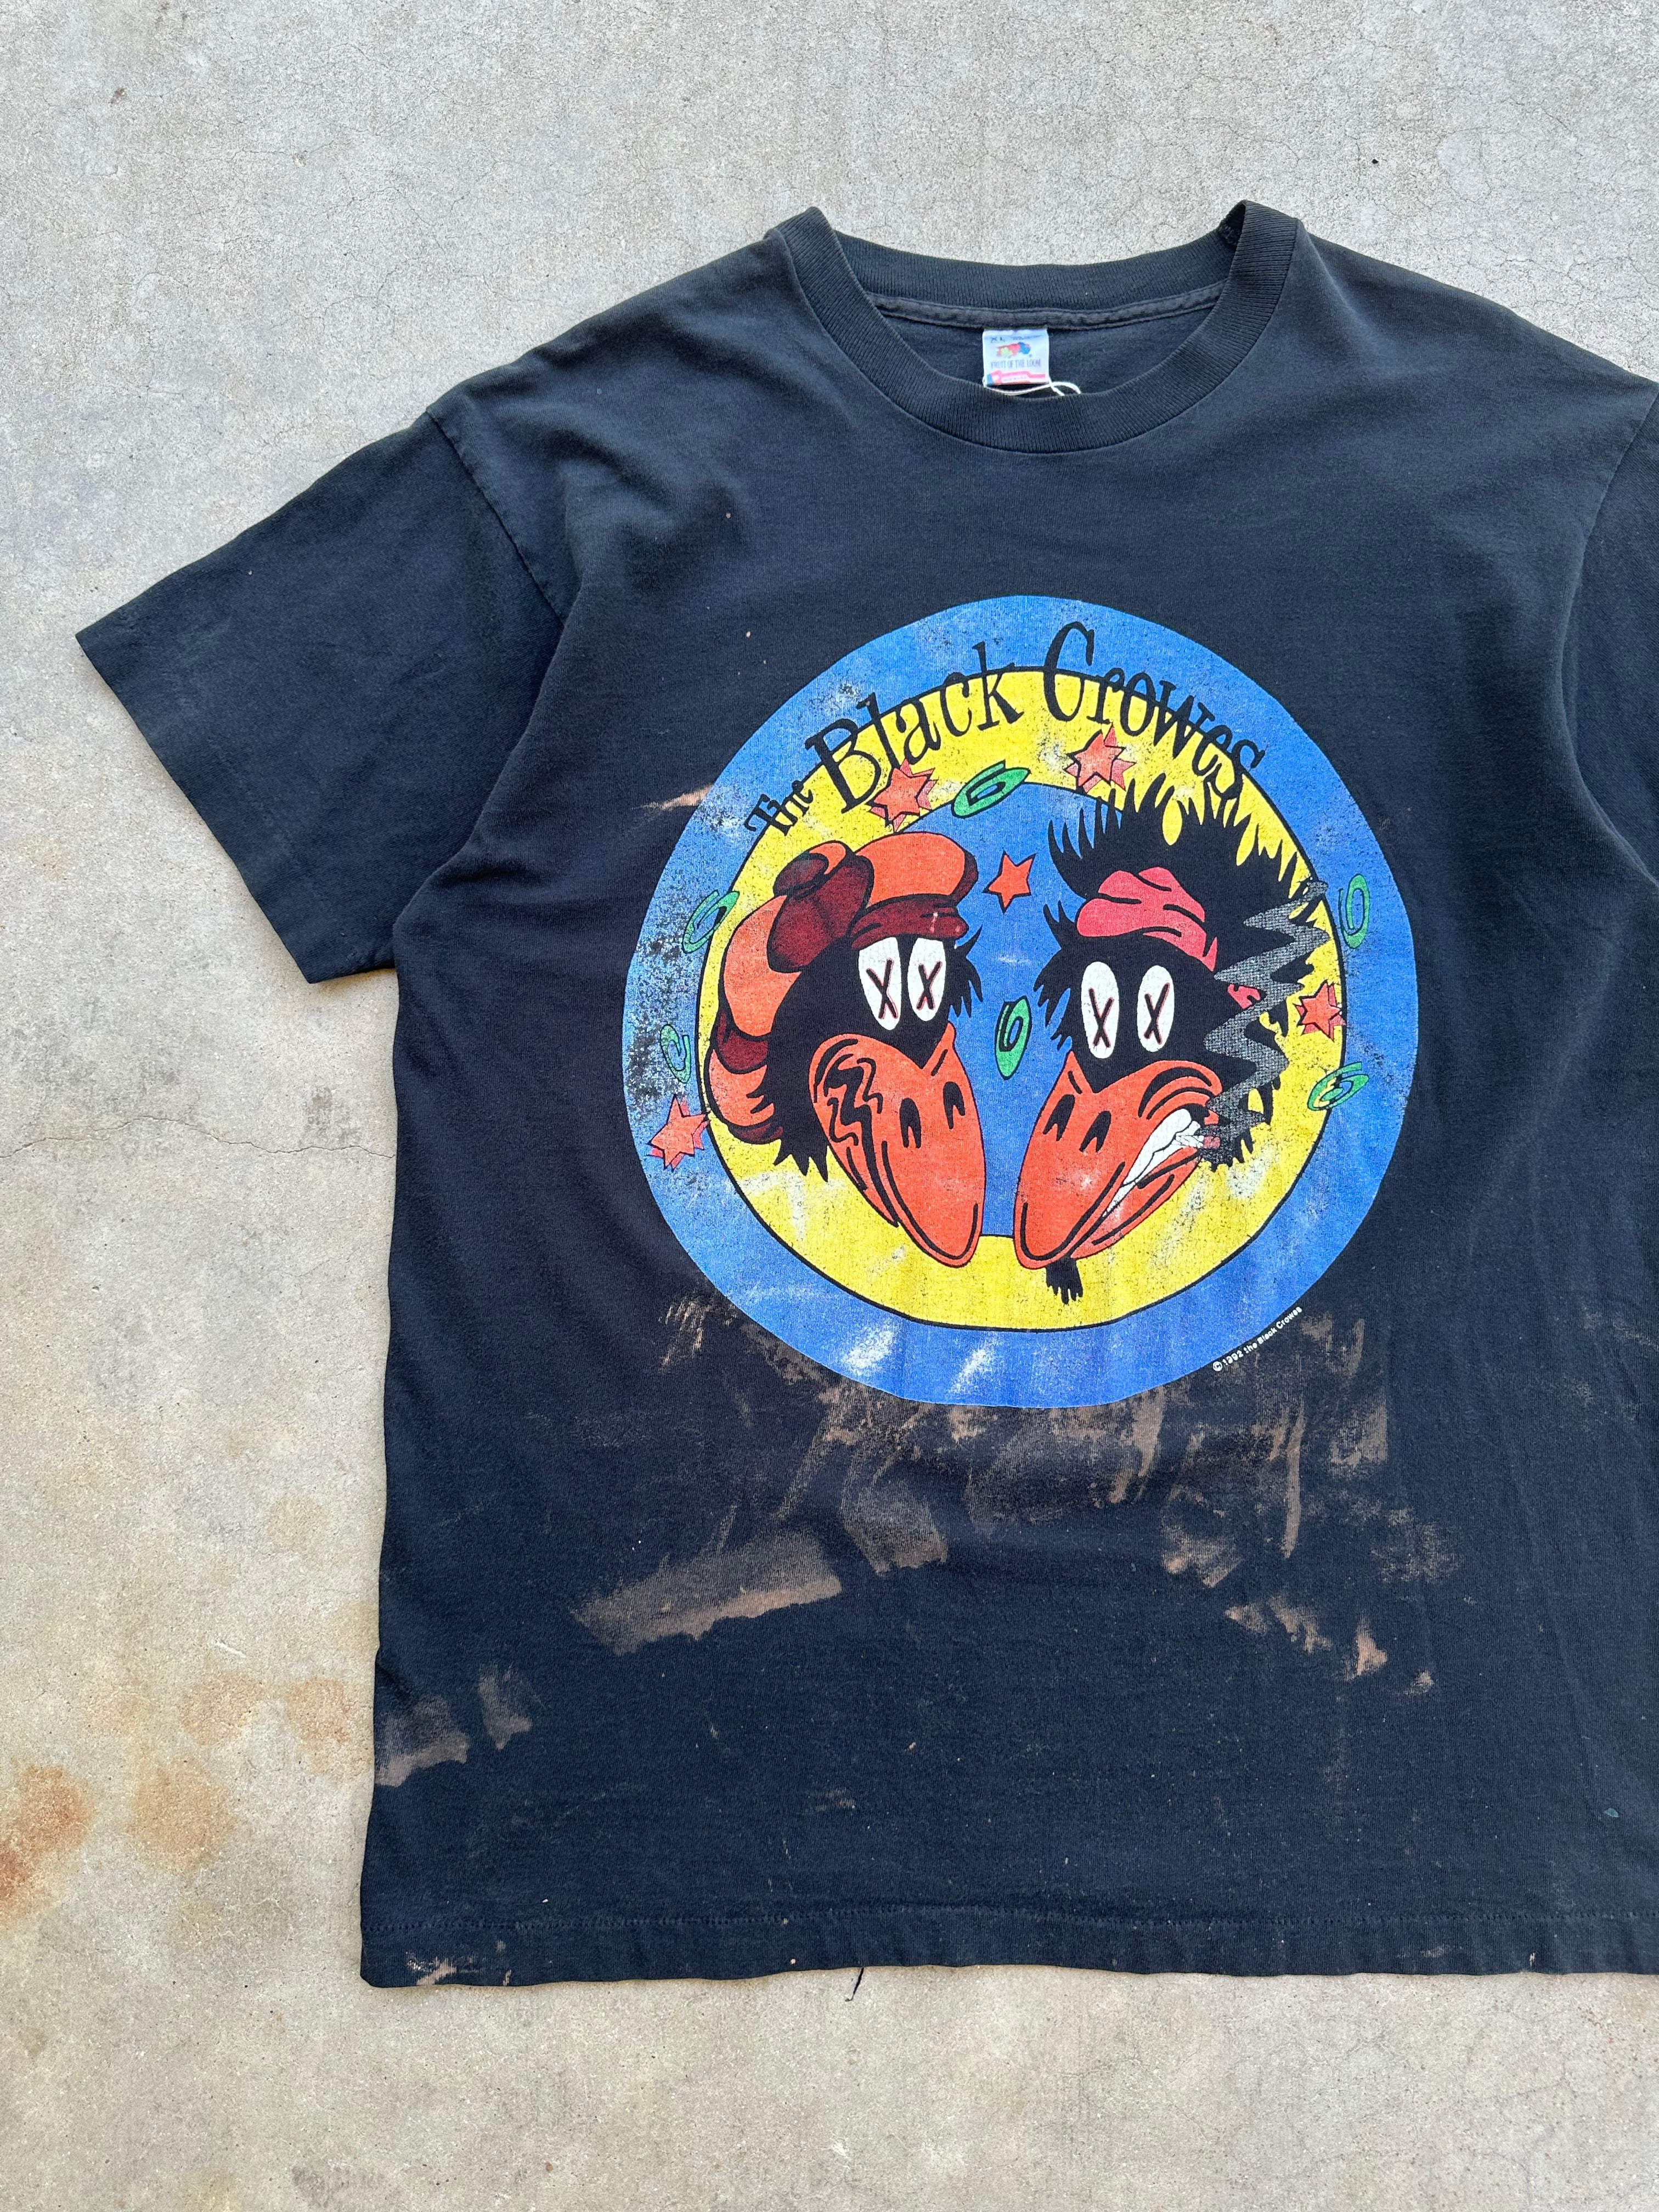 1992 The Black Crowes “High as The Moon” Tour T-shirt (XL)